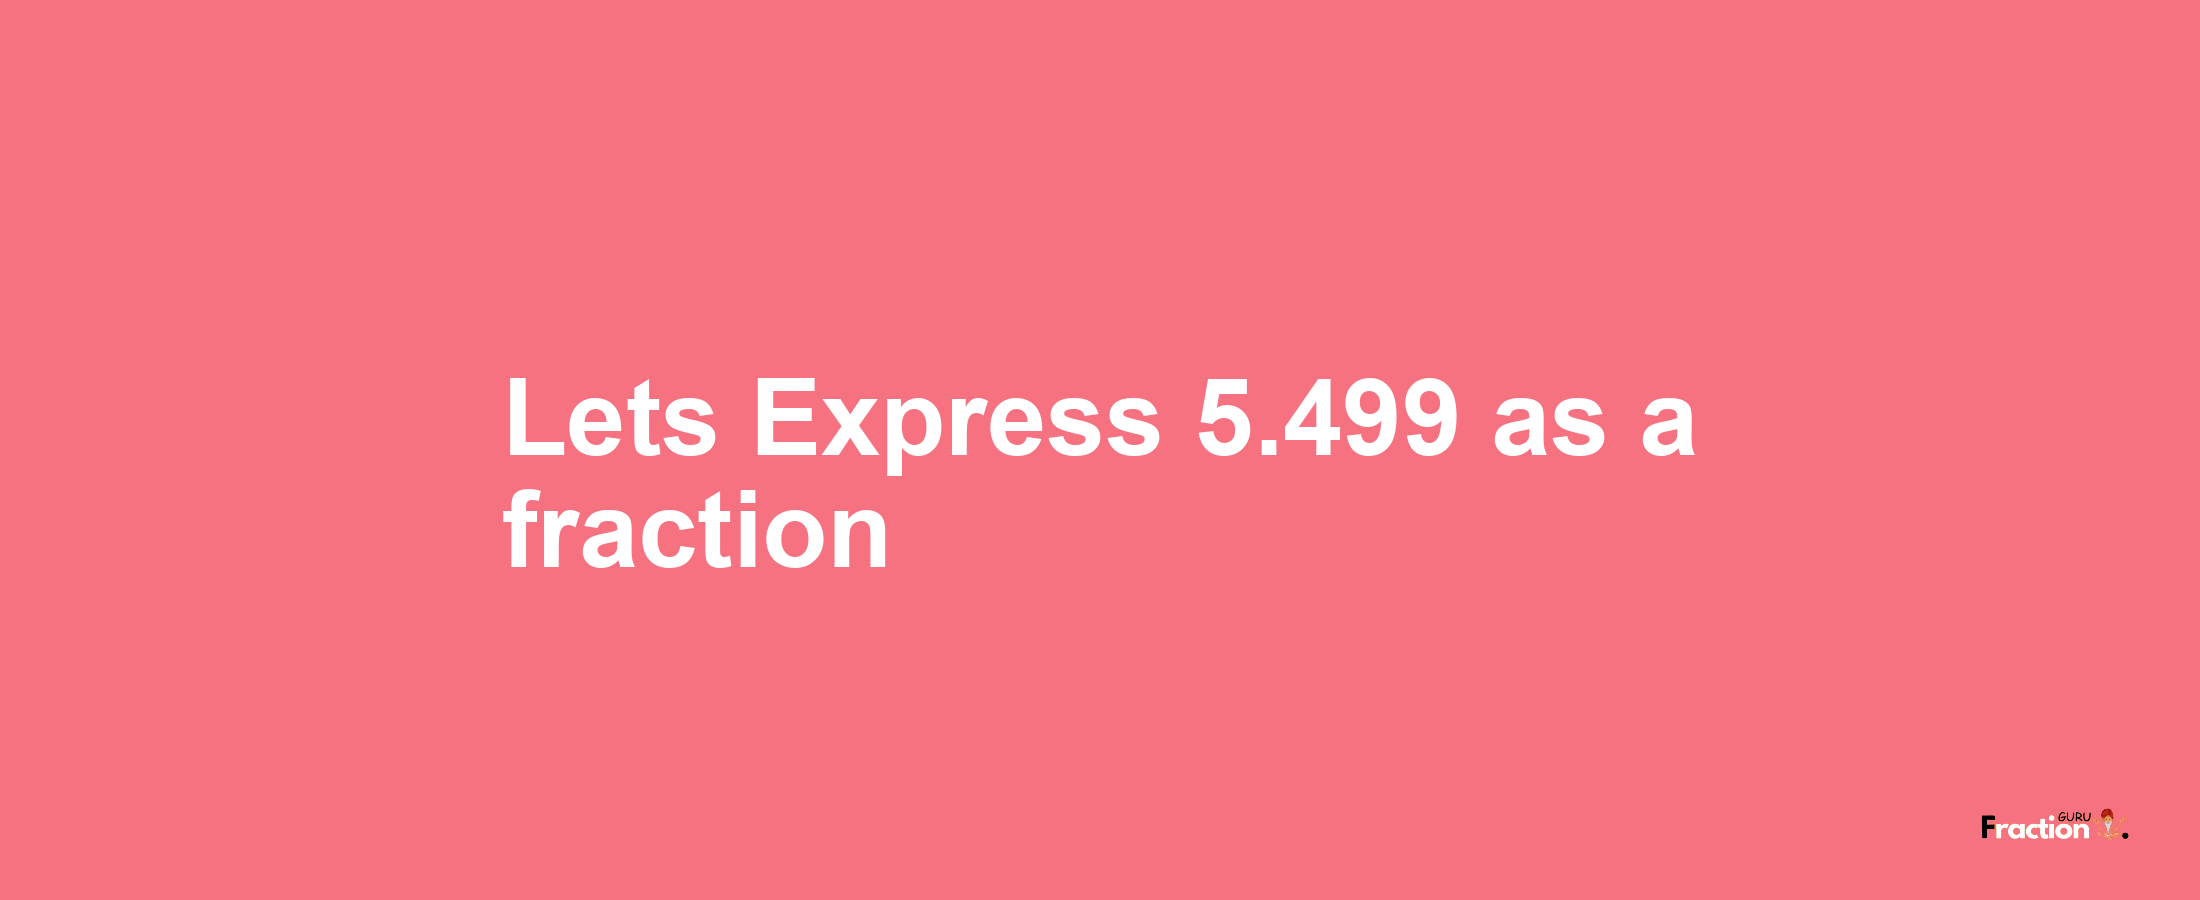 Lets Express 5.499 as afraction